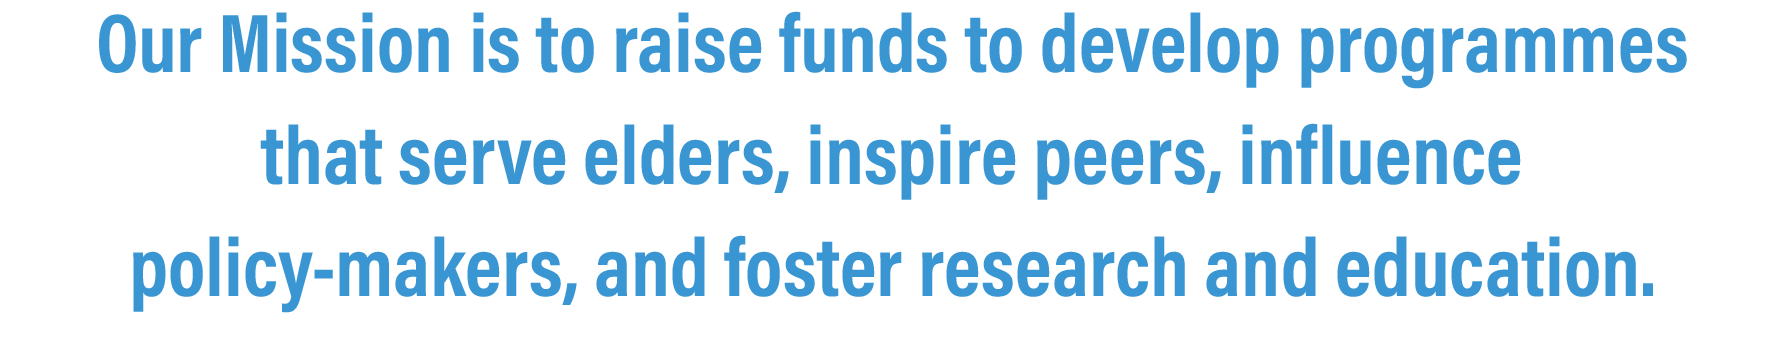 Our Mission is to raise funds to develop programmes that serve elders, inspire peers, influence policy-makers, and foster research and education